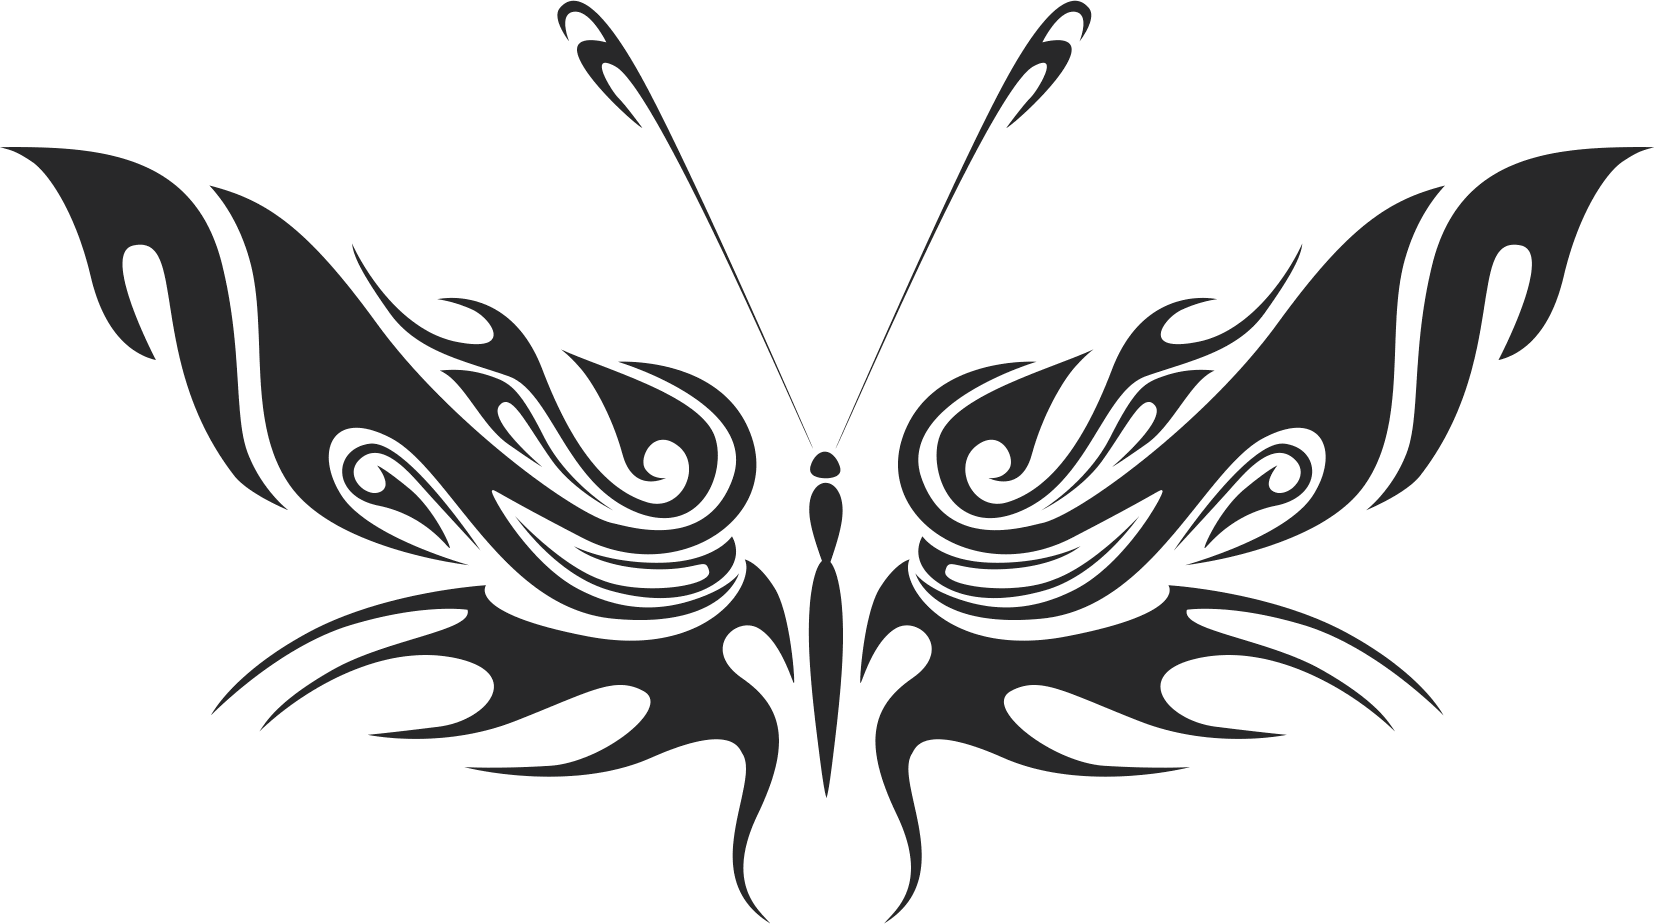 Tattoo Tribal Butterfly Wildlife 336 Free DXF File